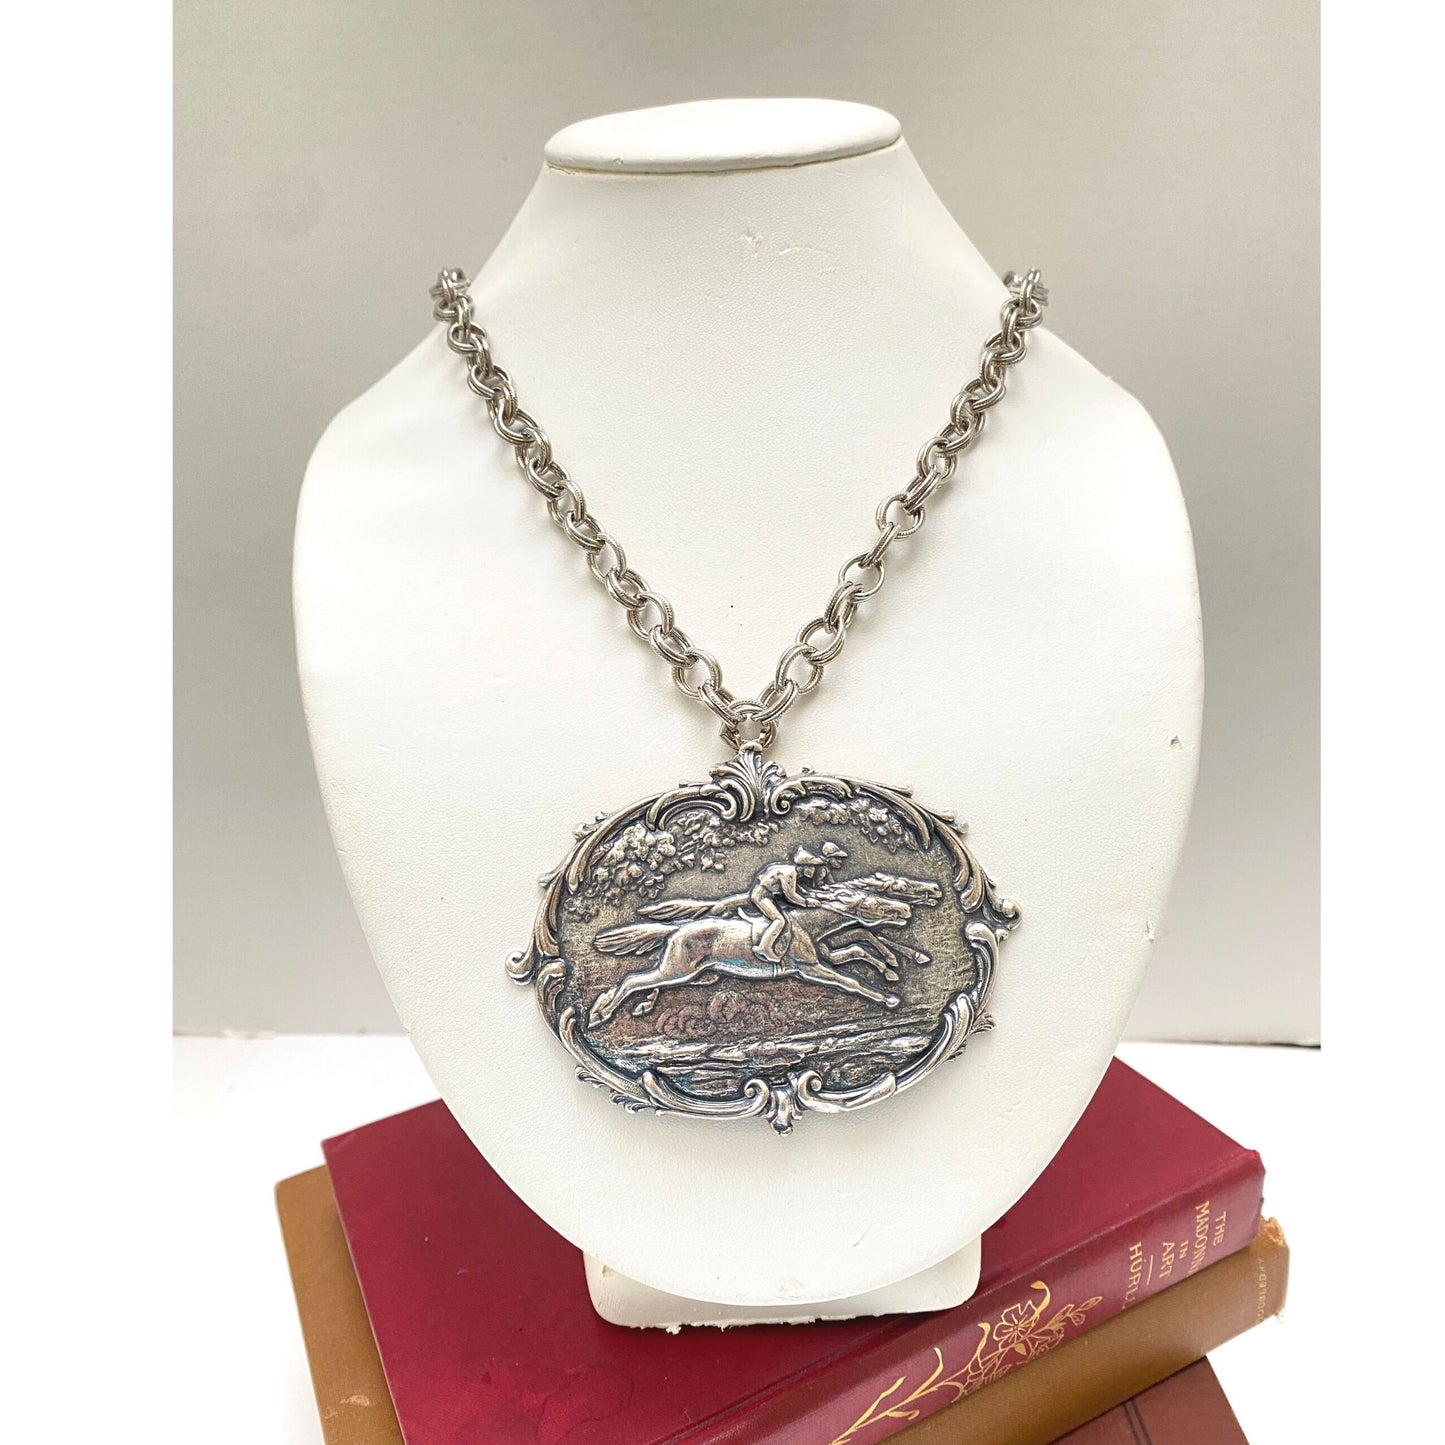 Silver Racehorse Necklace, Racehorse Jewelry, Racehorse Lover Gift